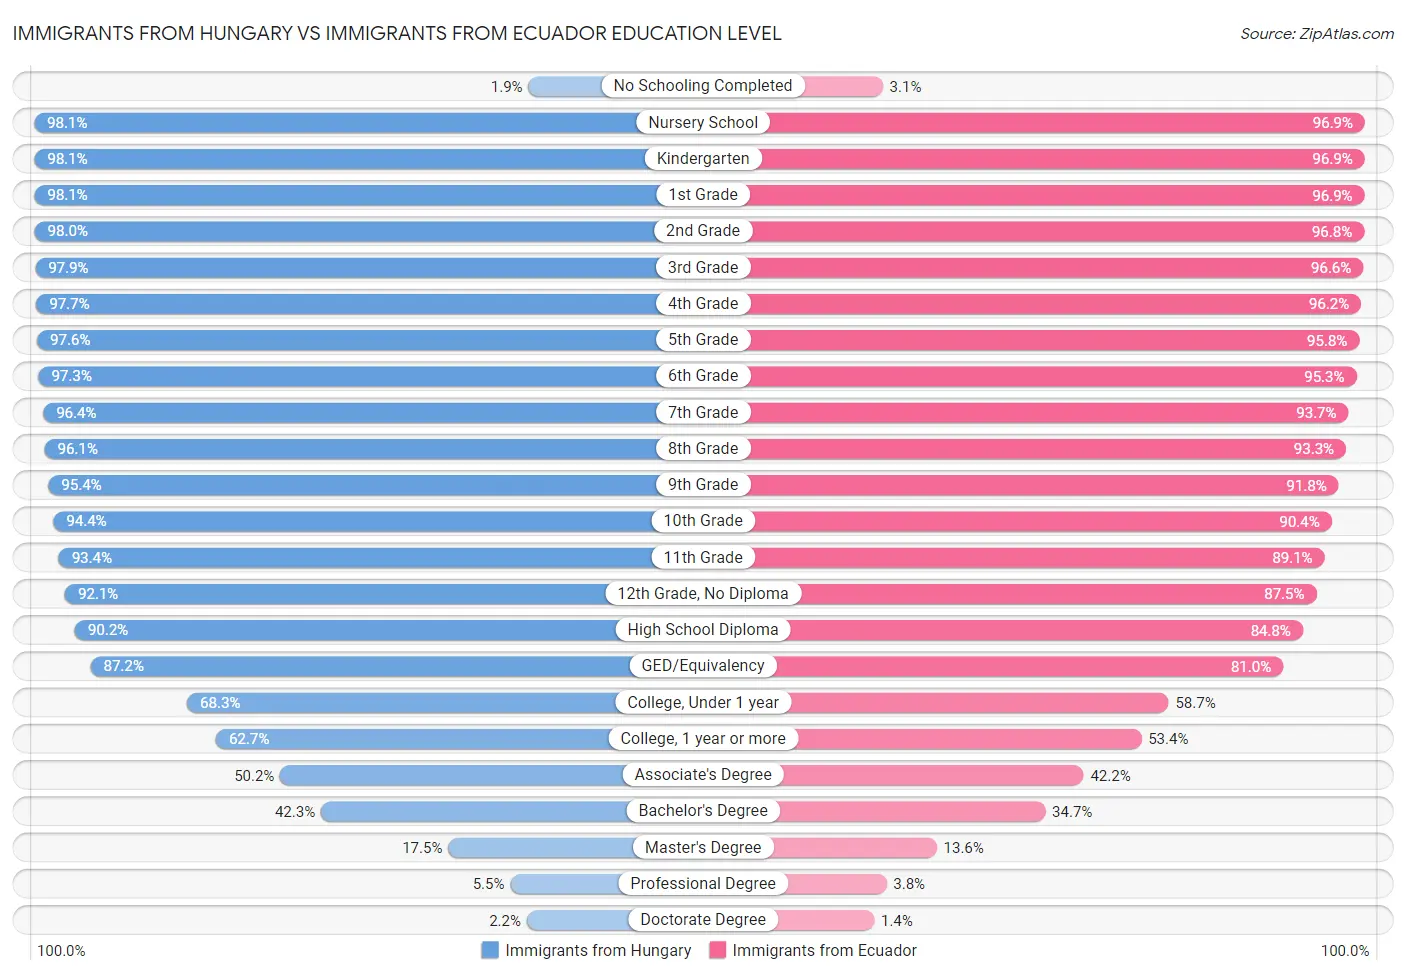 Immigrants from Hungary vs Immigrants from Ecuador Education Level